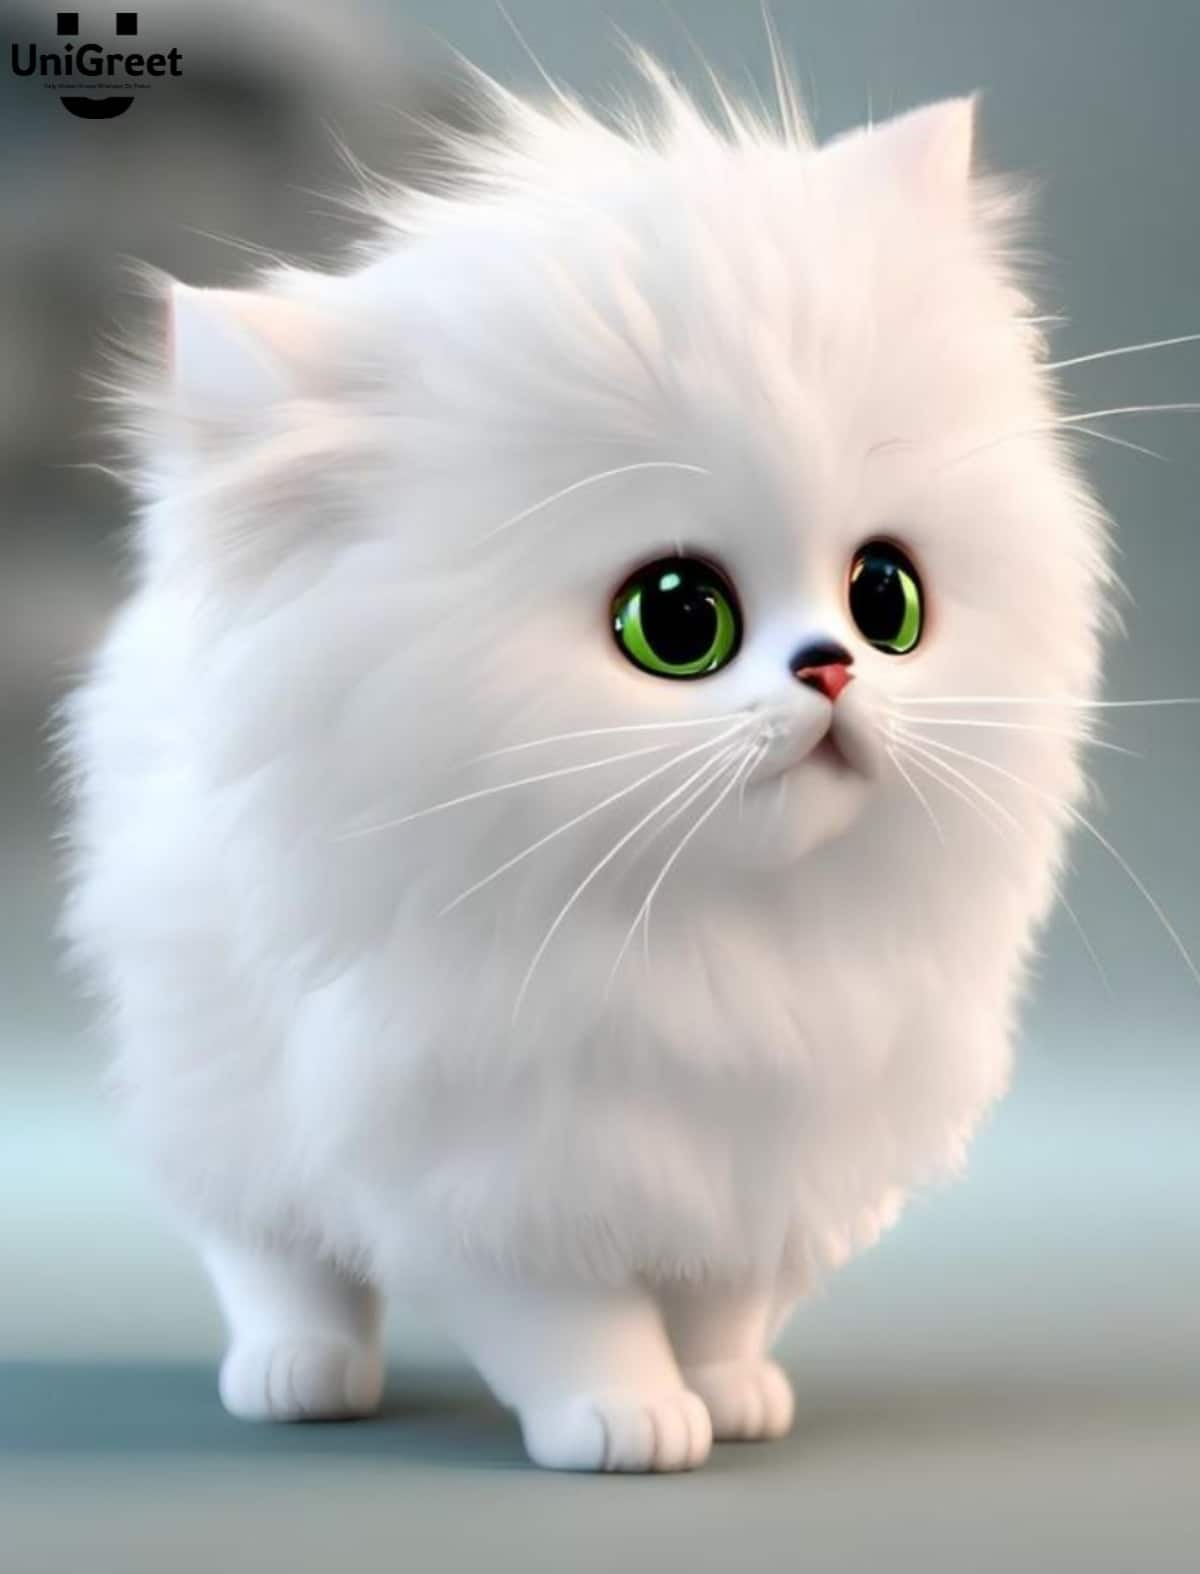 The Best Collection of Cute Images for DP: Over 999+ Adorable Images in Full 4K